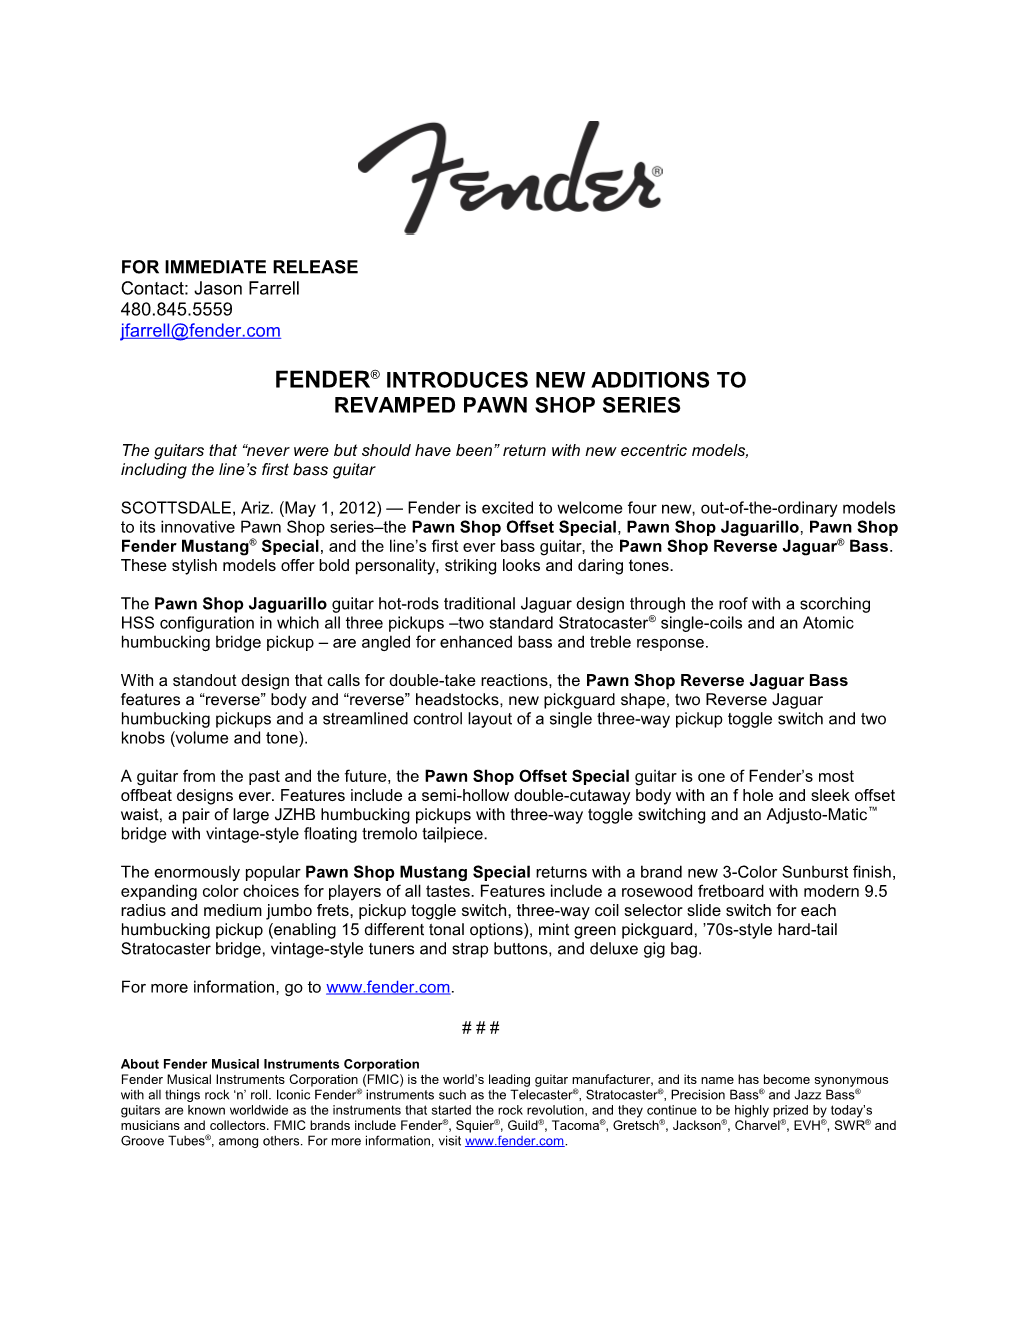 Fender Introduces New Additions To